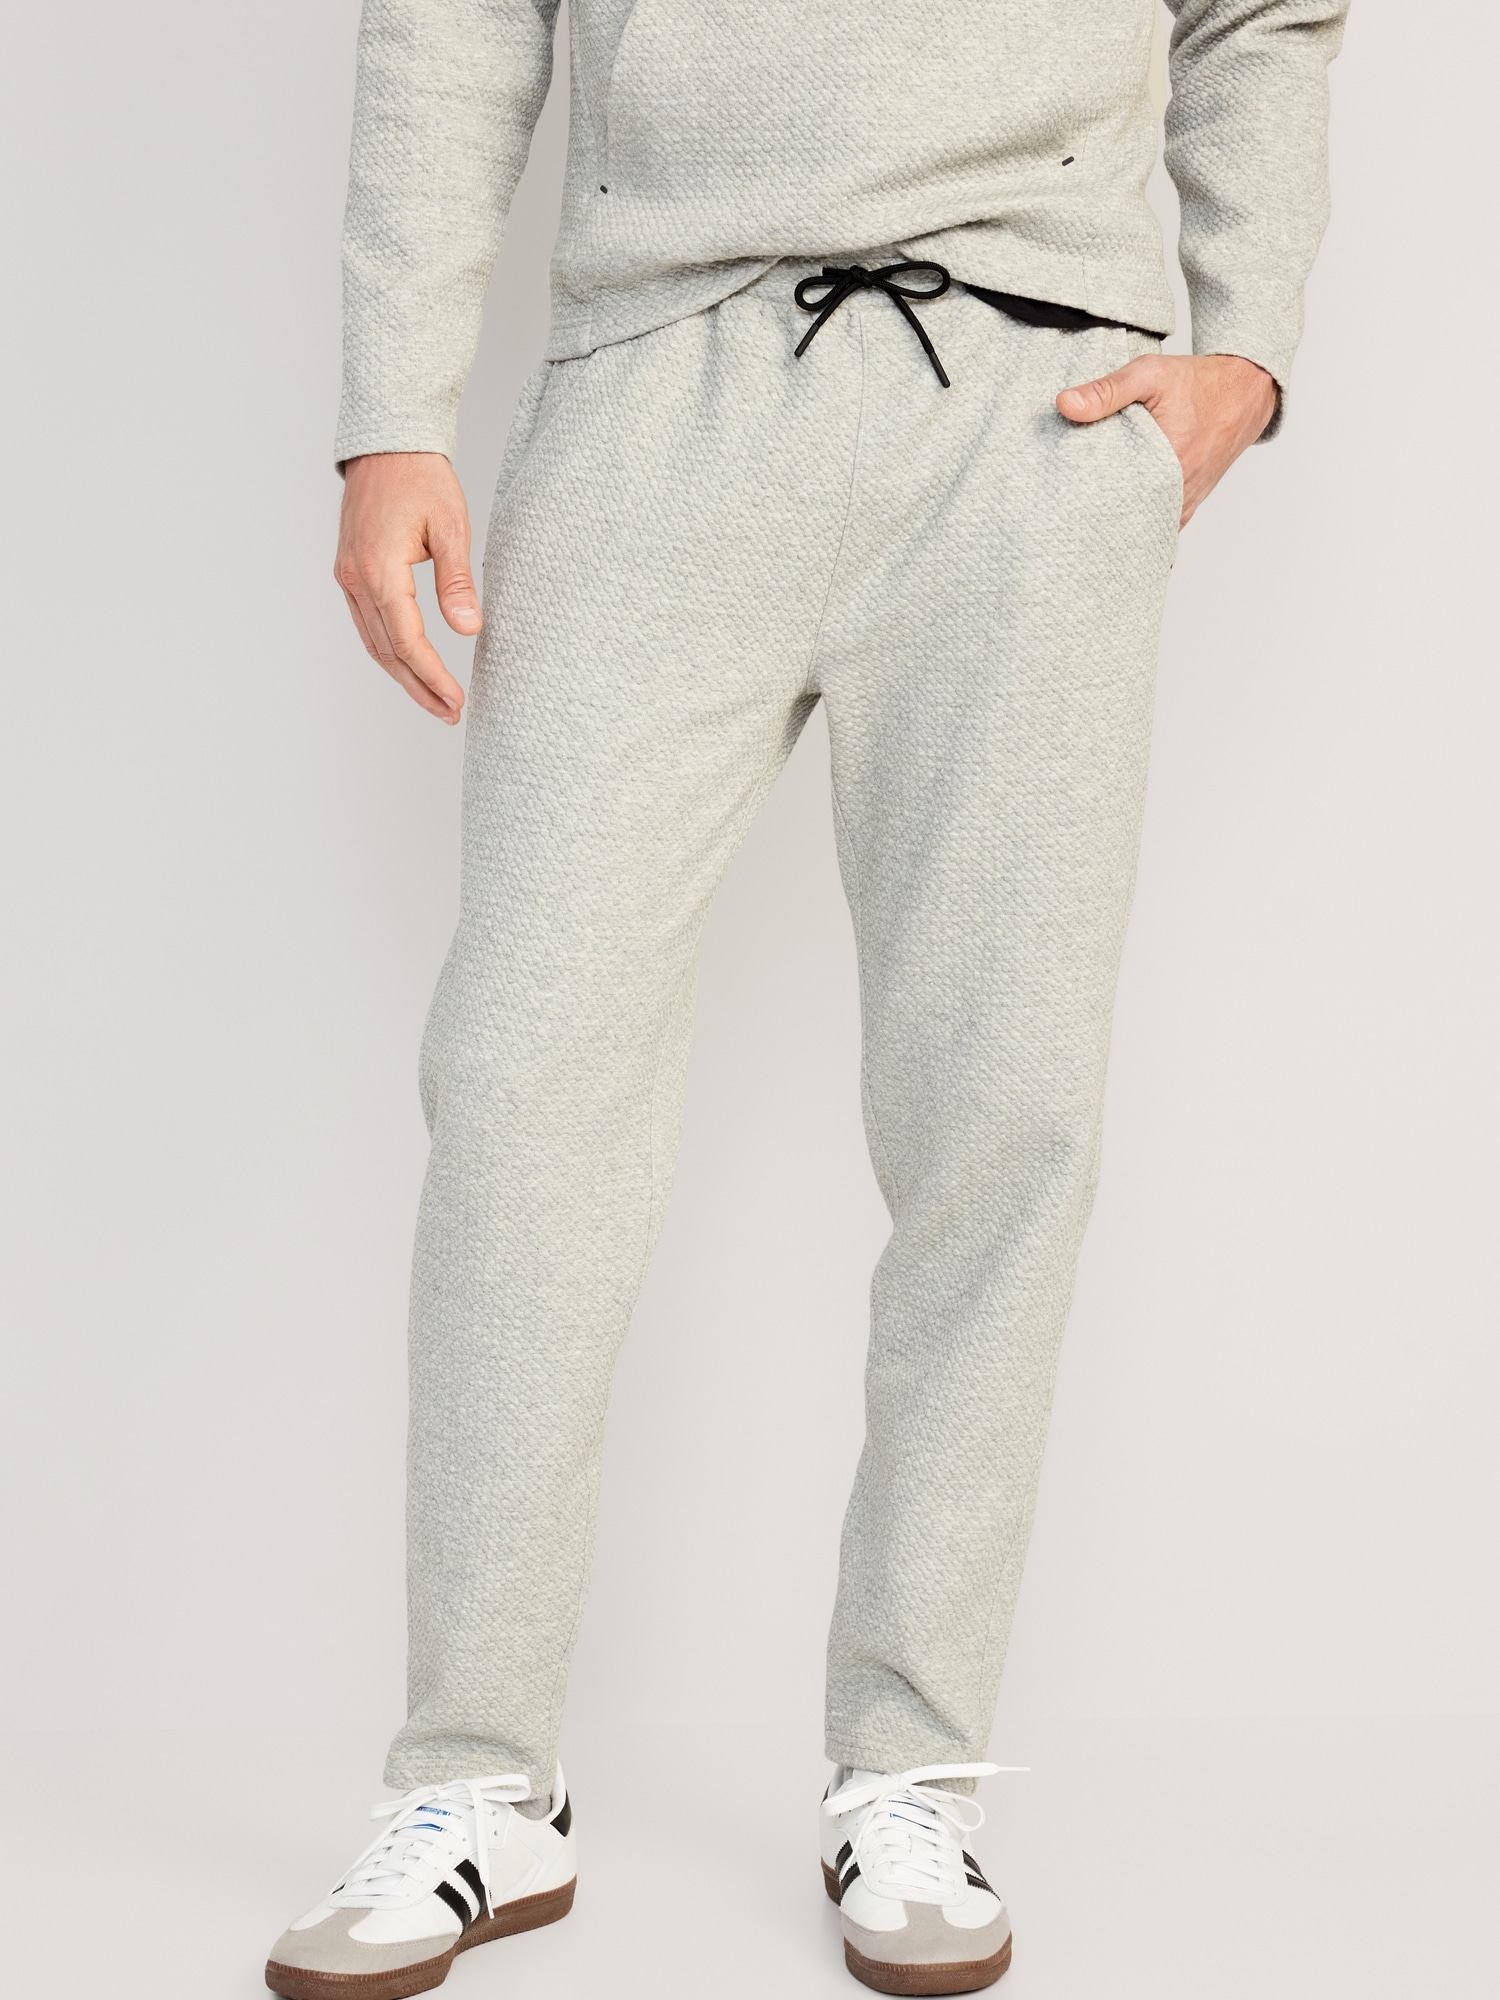 Textured Dynamic Fleece Tapered Sweatpants